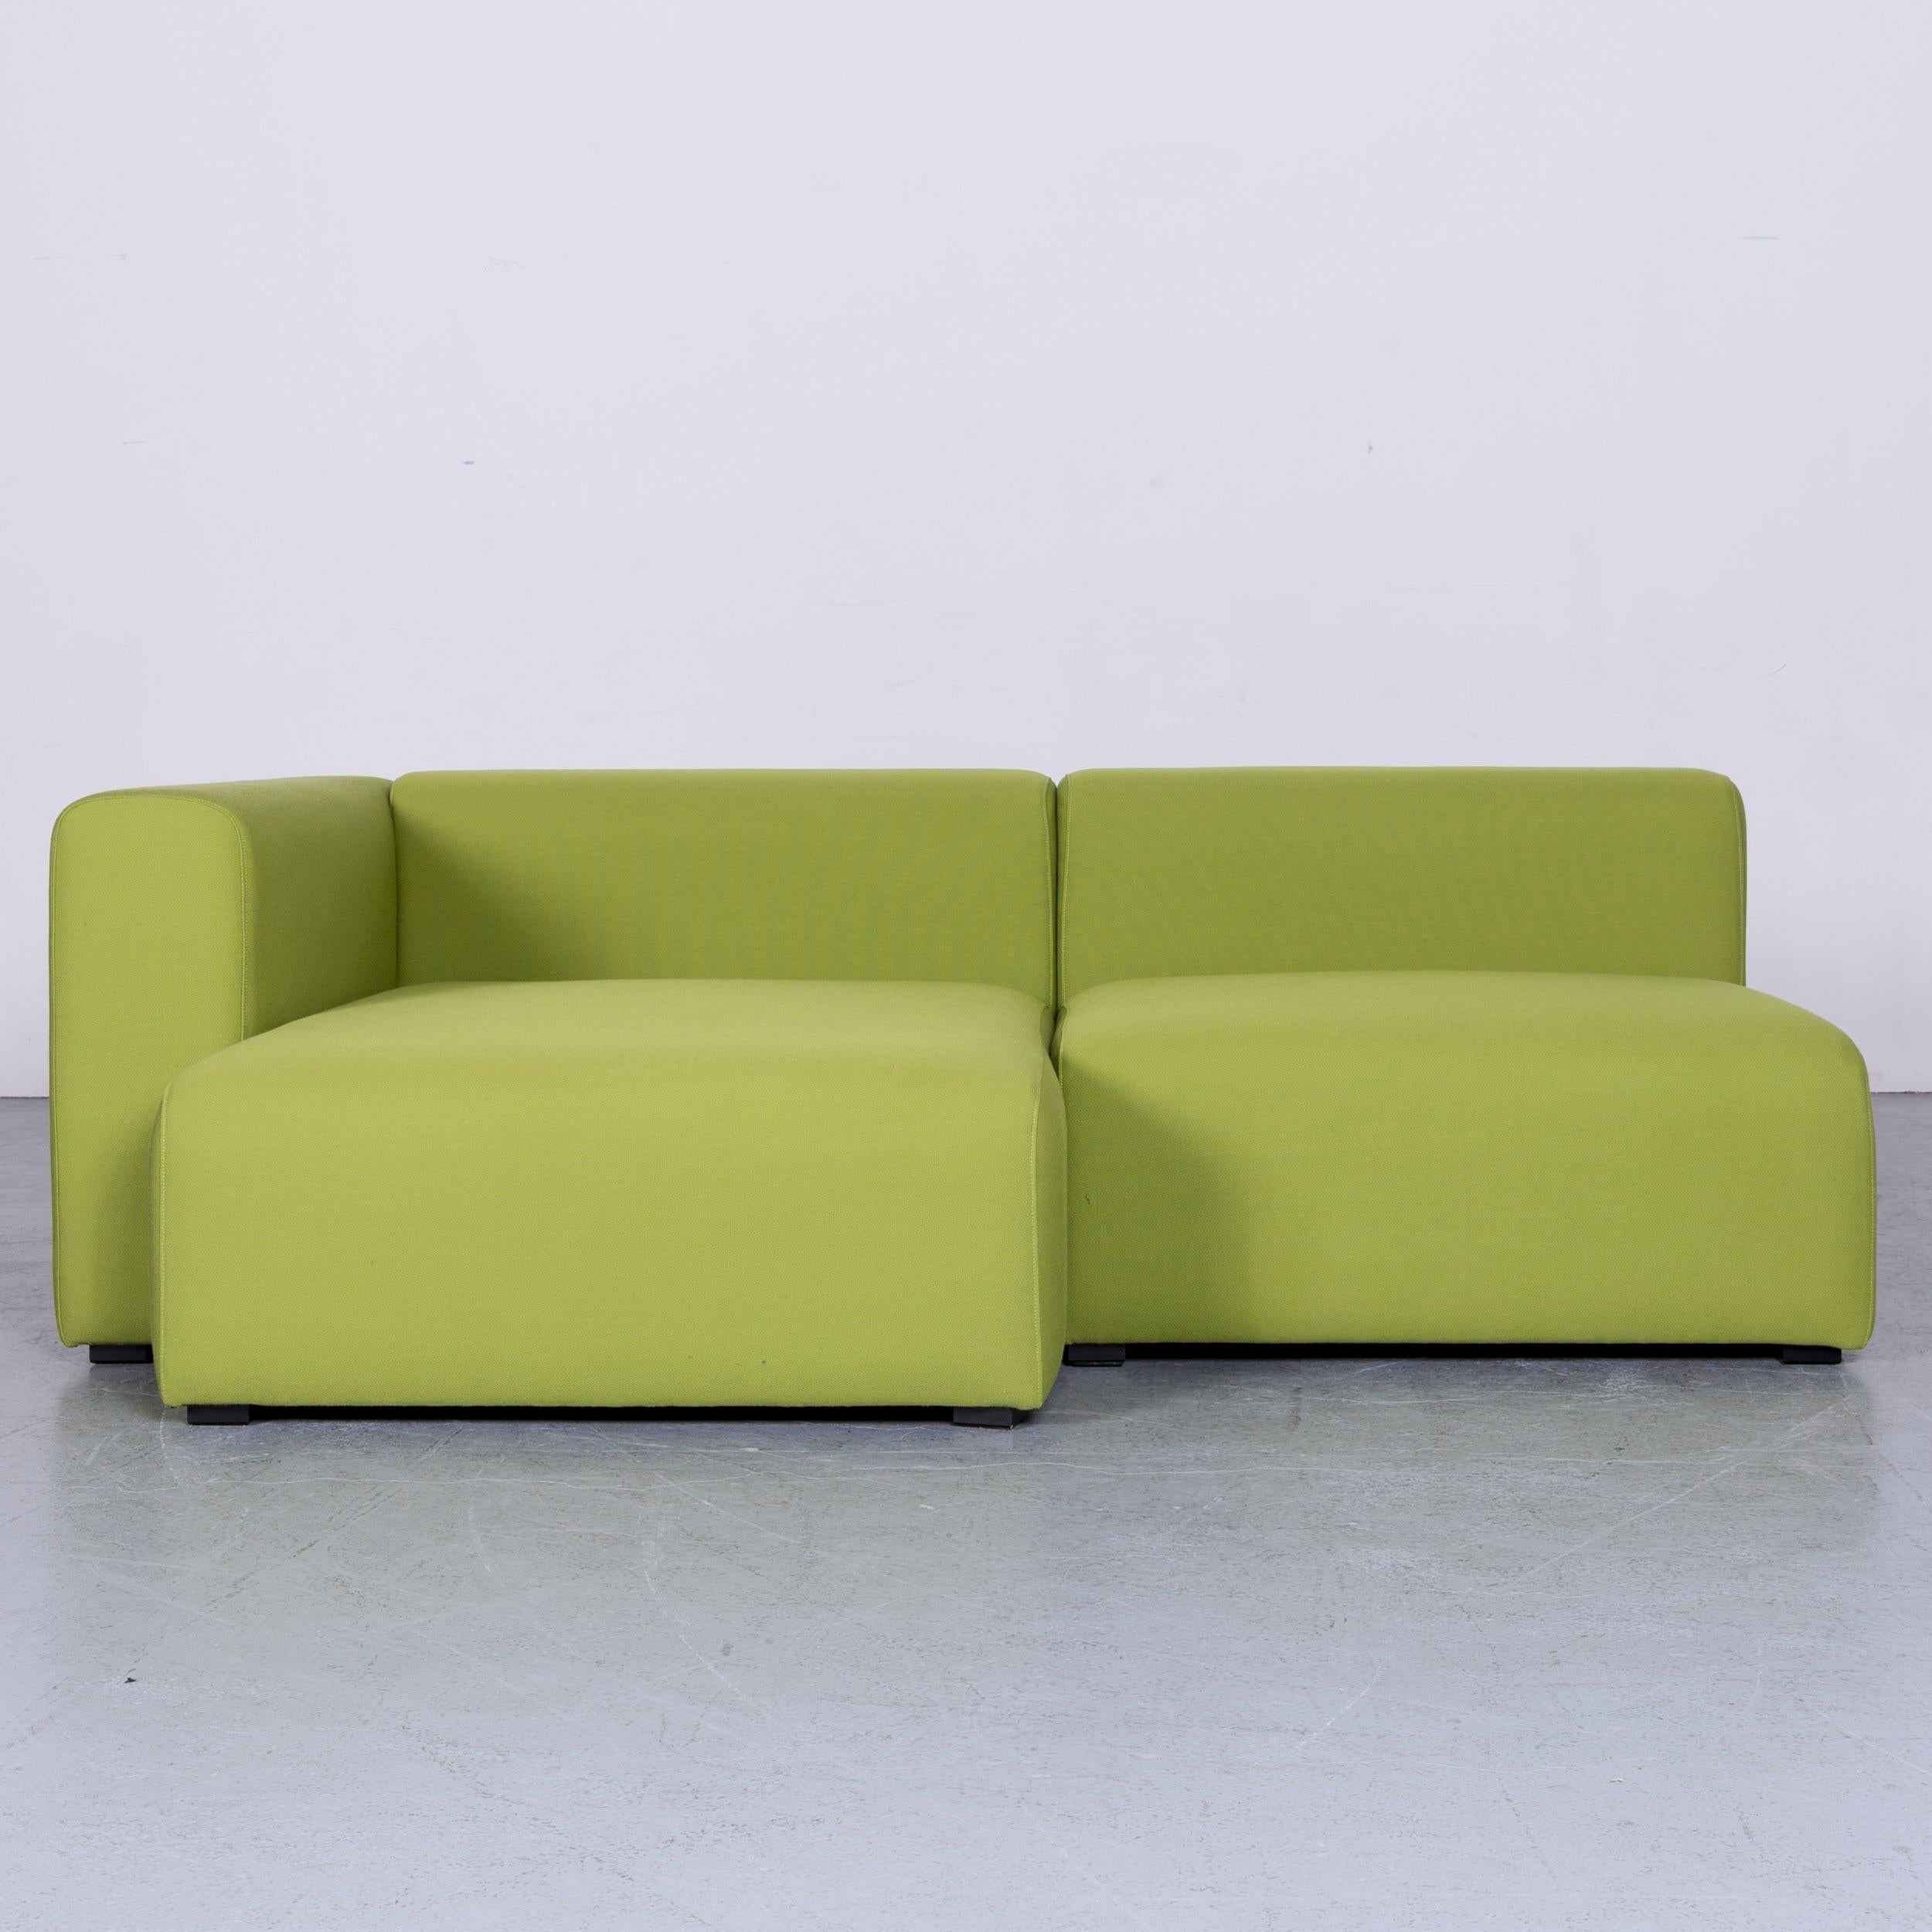 We bring to you an Hay Mags designer fabric sofa green corner couch.